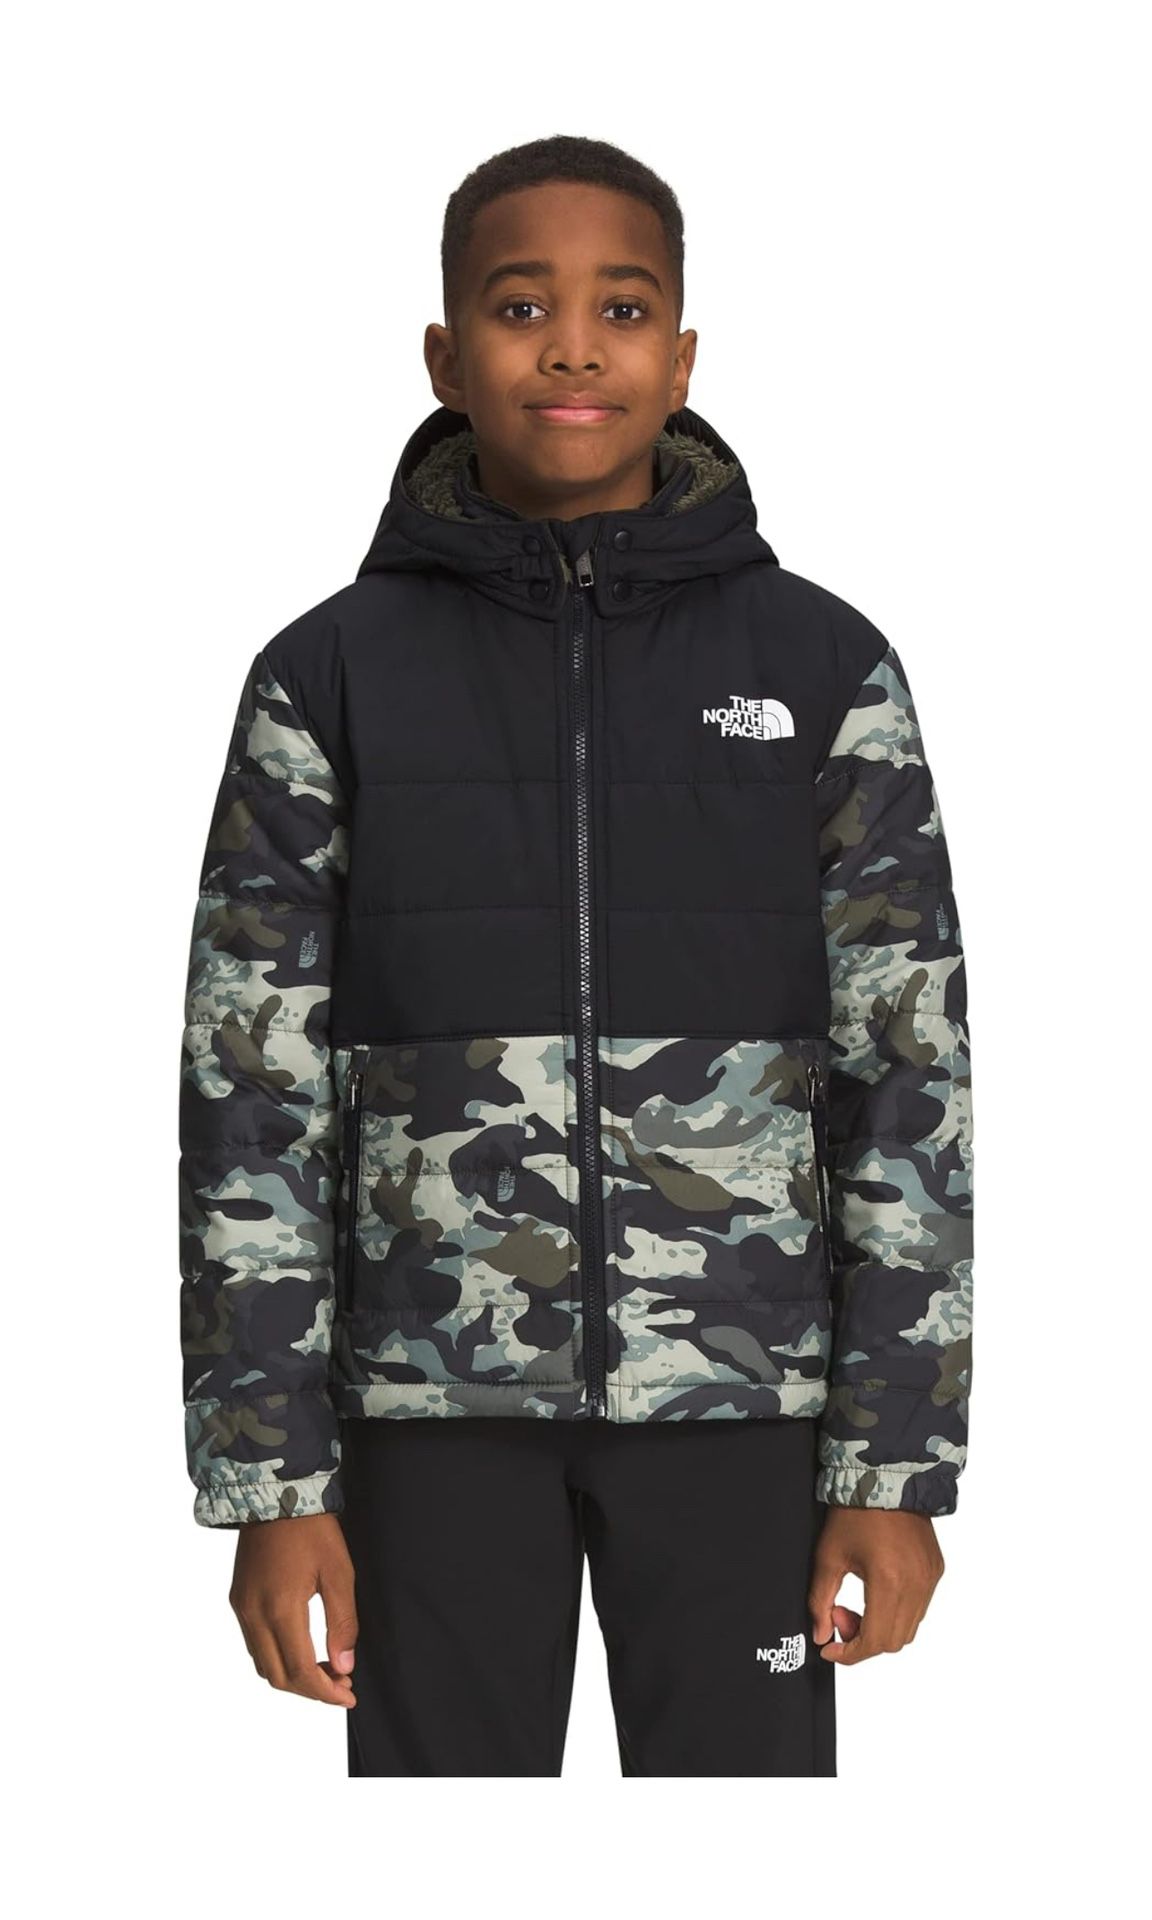 THE NORTH FACE Jacket (New)